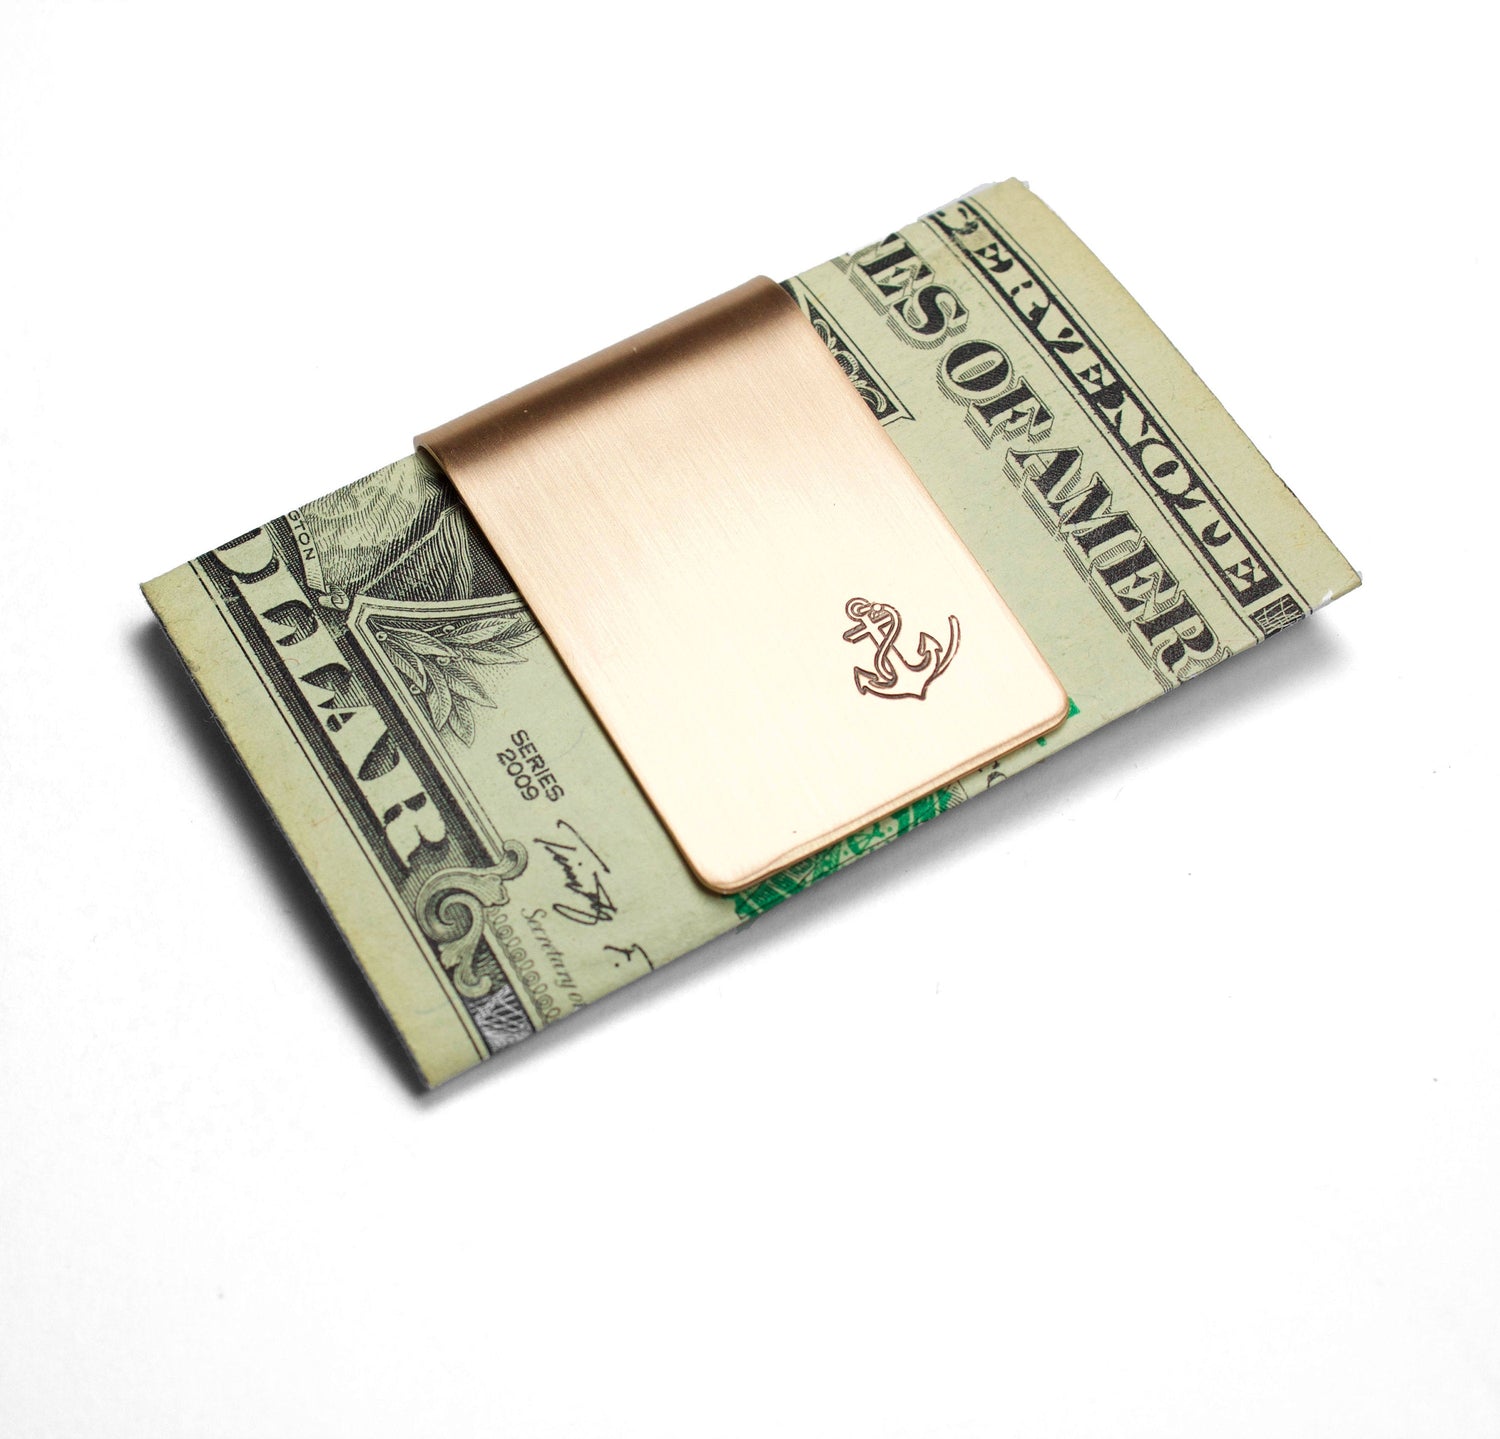 Anchor and Rope Money Clip. A small money clip with a stamped image of a boat anchor wrapped in a length of rope. The stamped design is darkened (oxidized). The money clip is shown in bronze metal and is shown actual size with a US dollar bill.